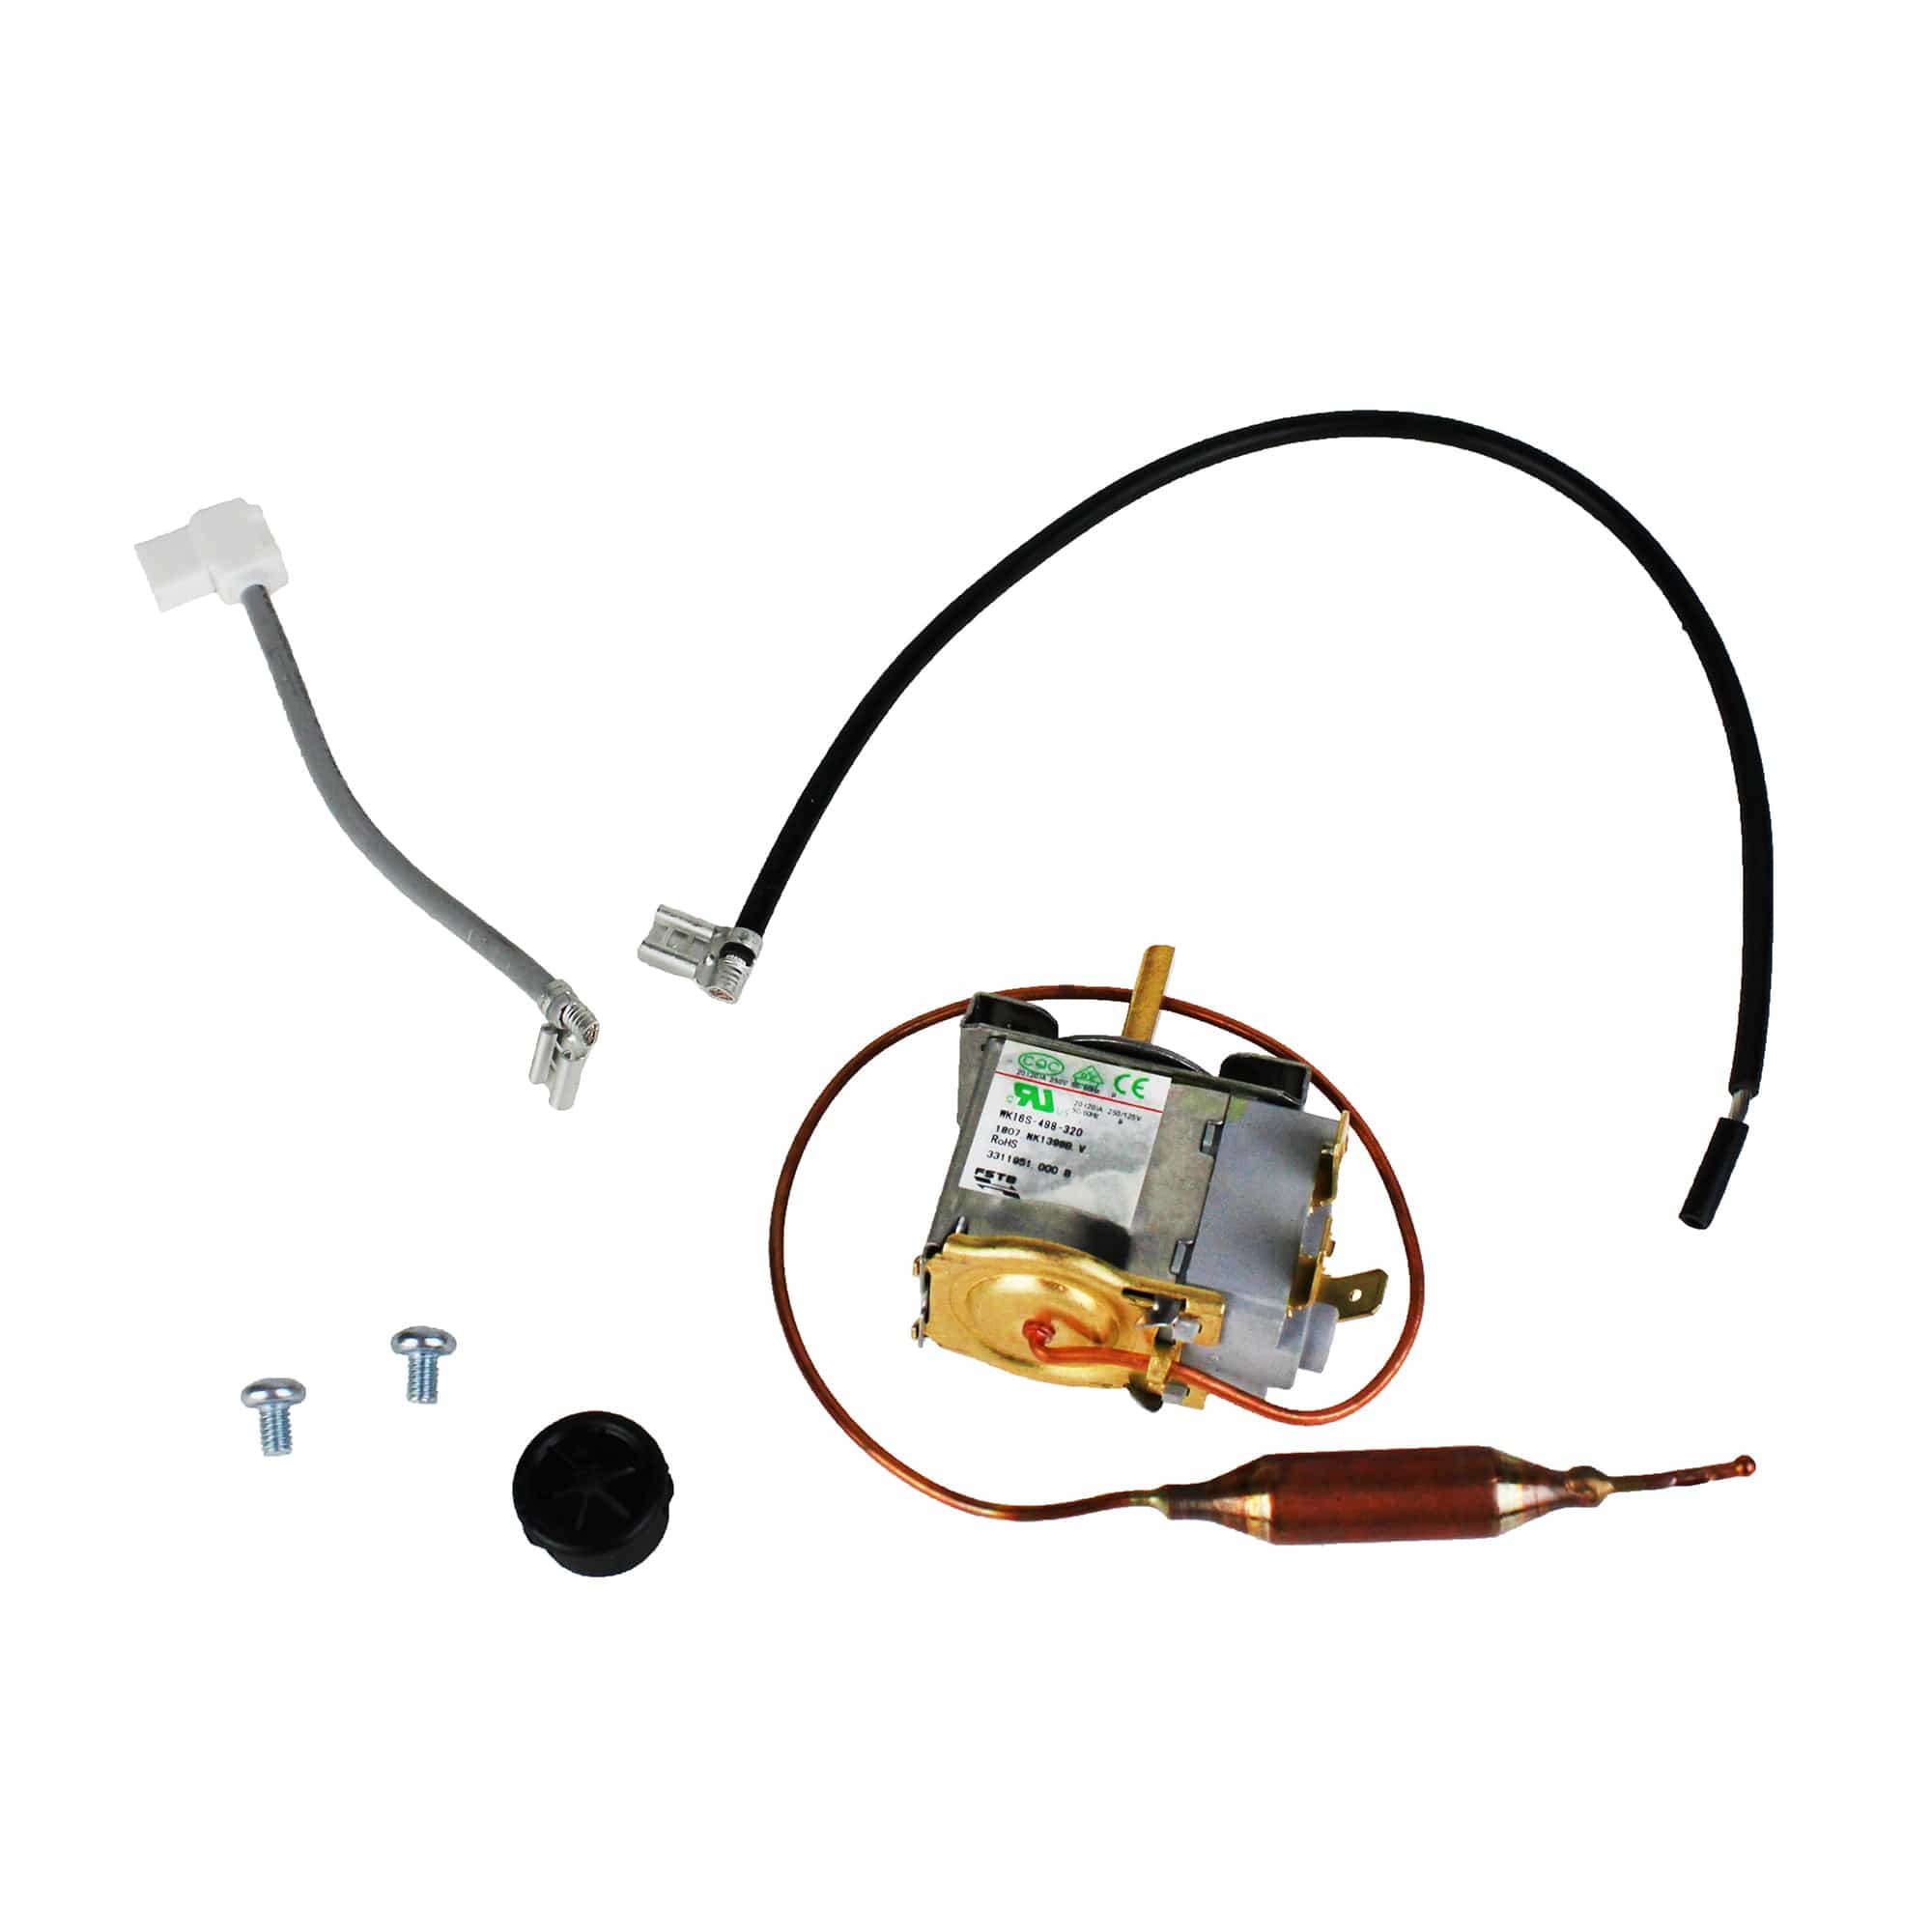 Dometic 3312161.015 A/C Replacement Thermostat Kit